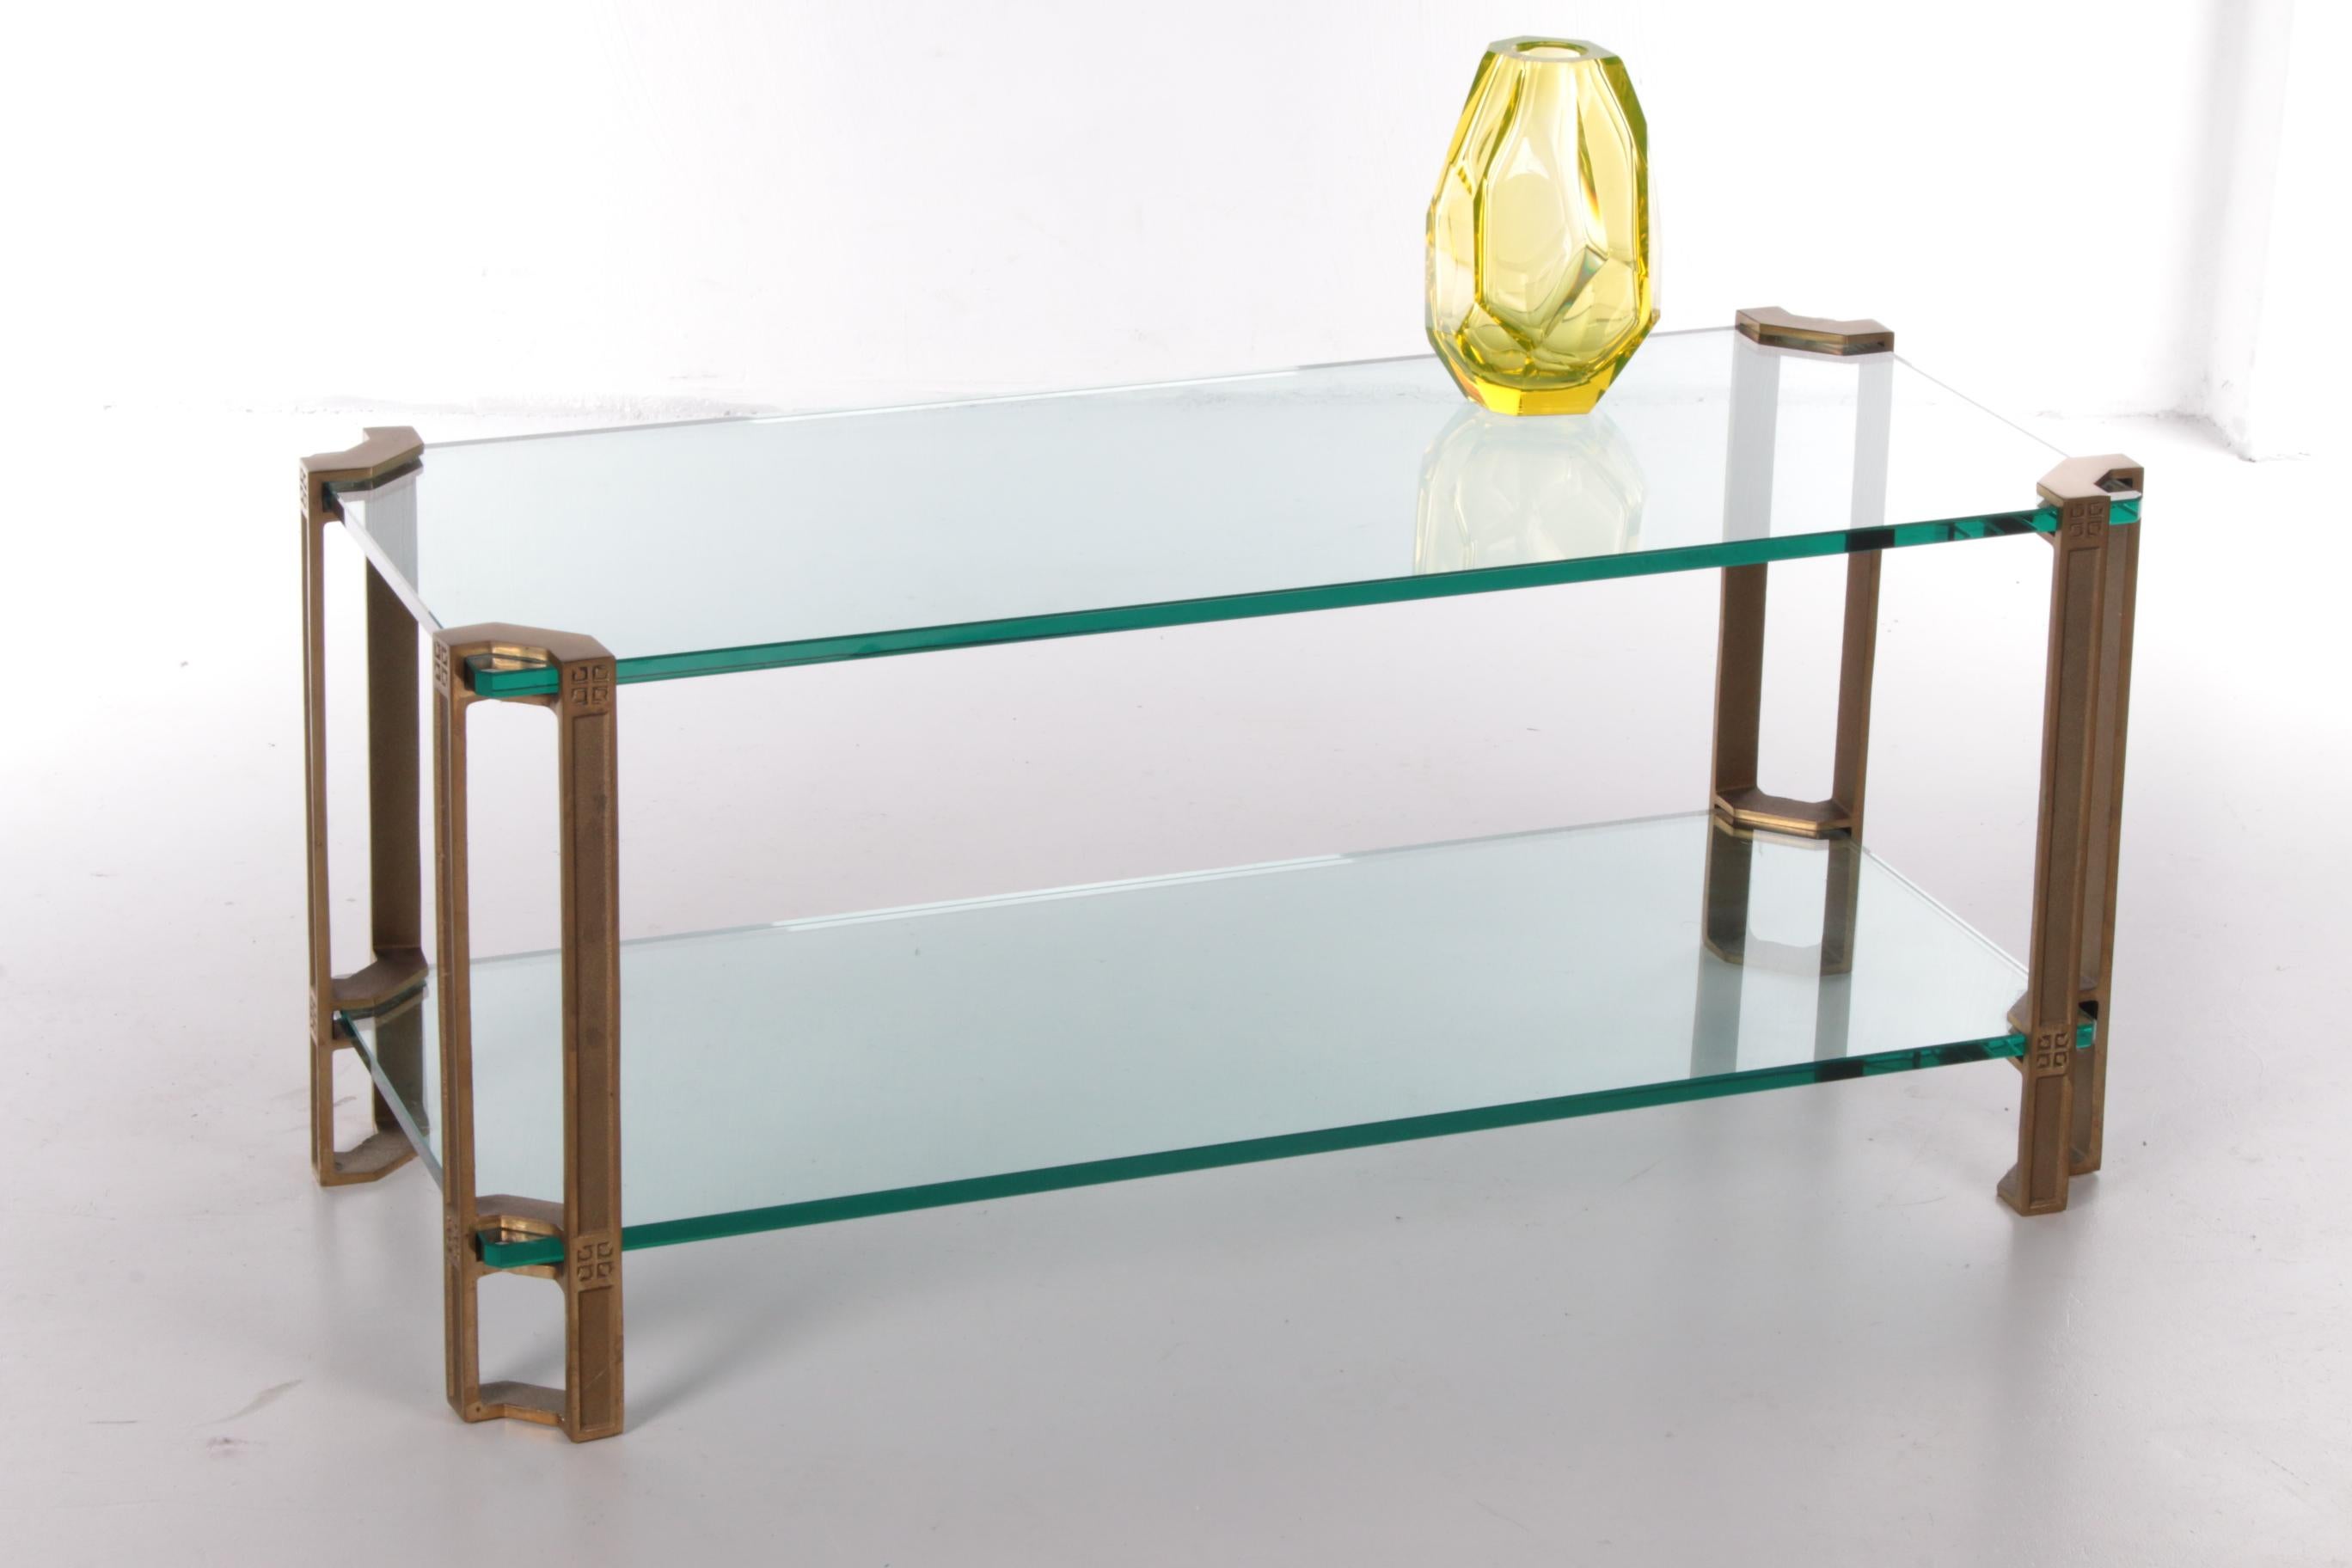 Top design table by Peter Ghyczy.

from the 1970s Model number T24

Is solid cast brass

The table consists of 2 glass plates of 16 mm thick.

The glass plates are in very good condition with hardly any scratches.

The pedestals can be